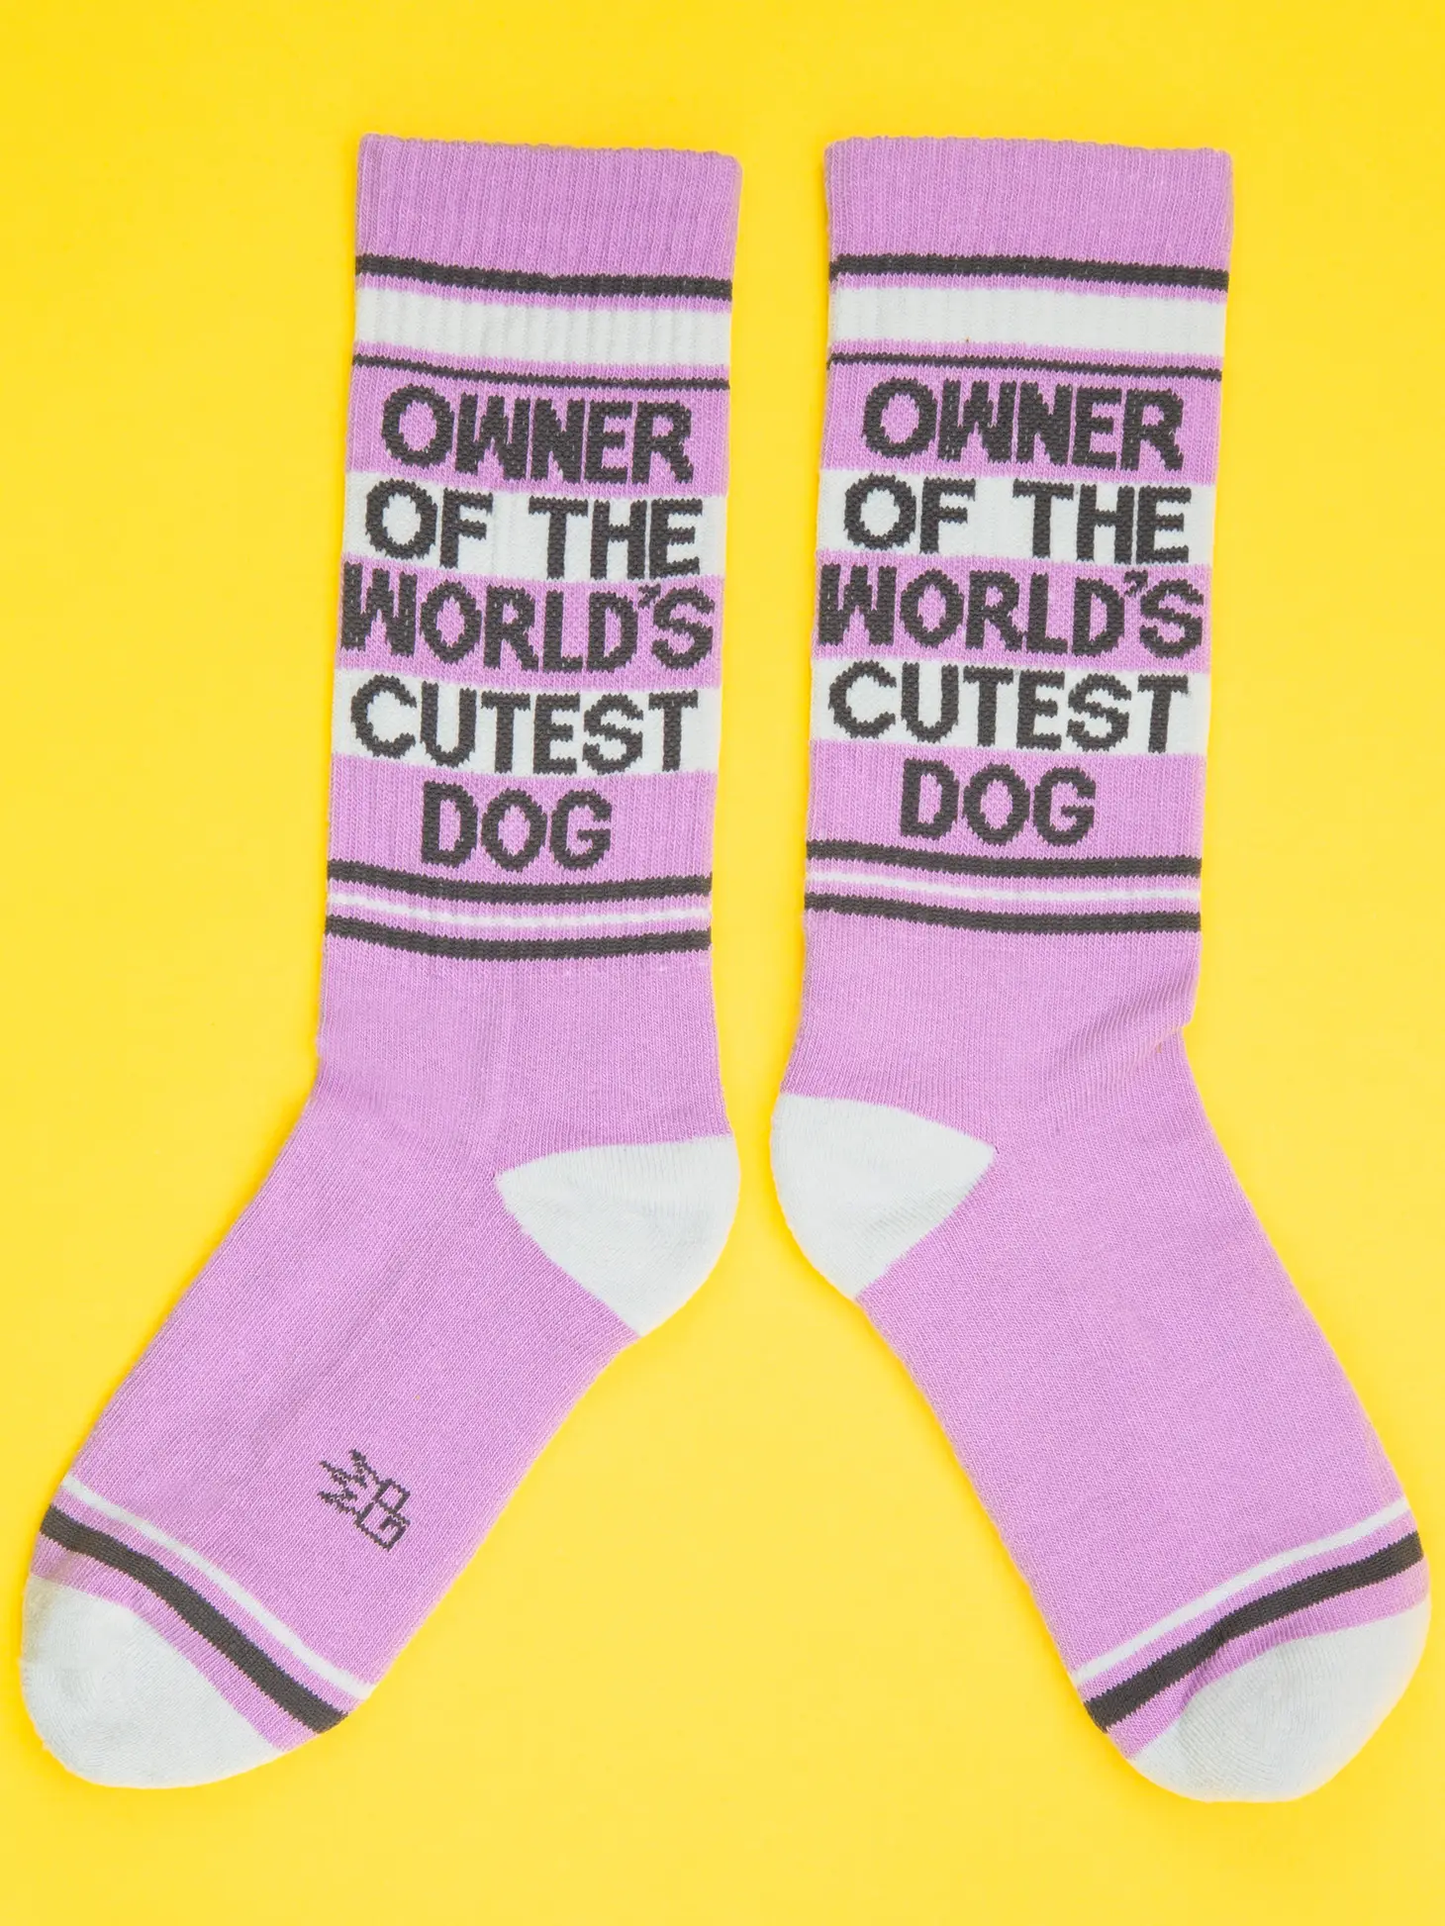 Owner of the Cutest Dog Socks